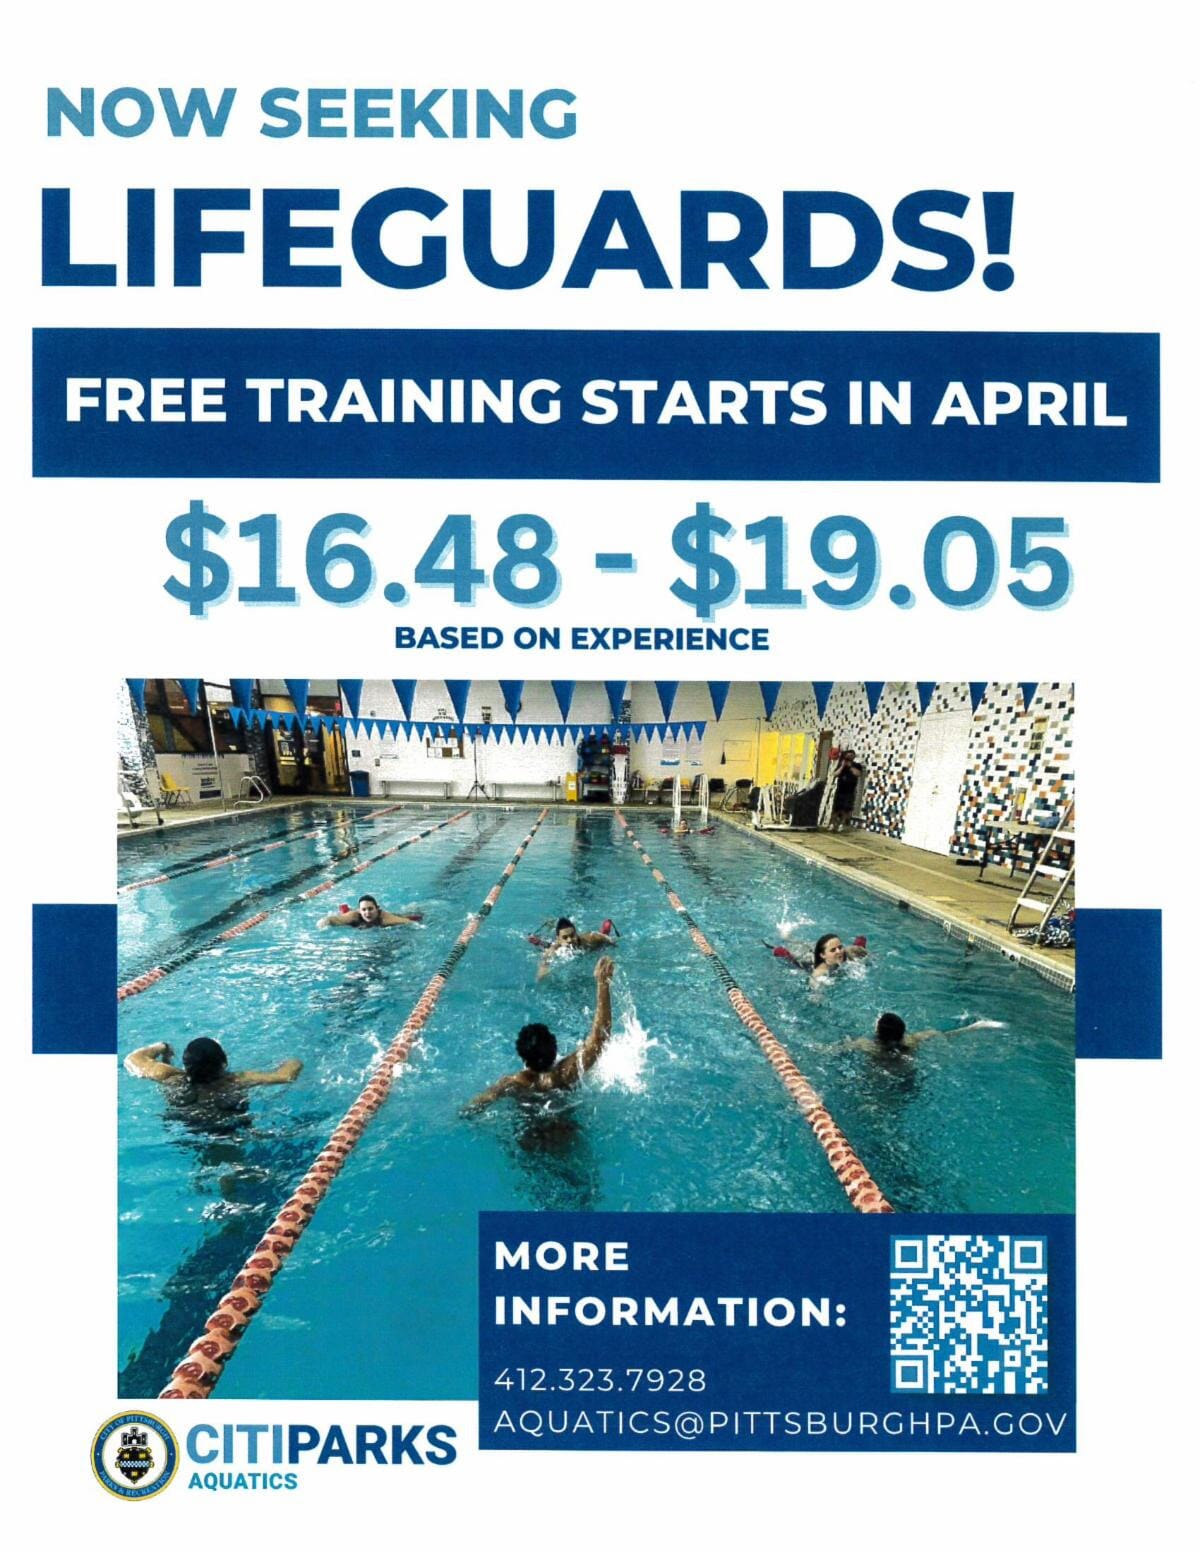 Citiparks lifeguards wanted for work